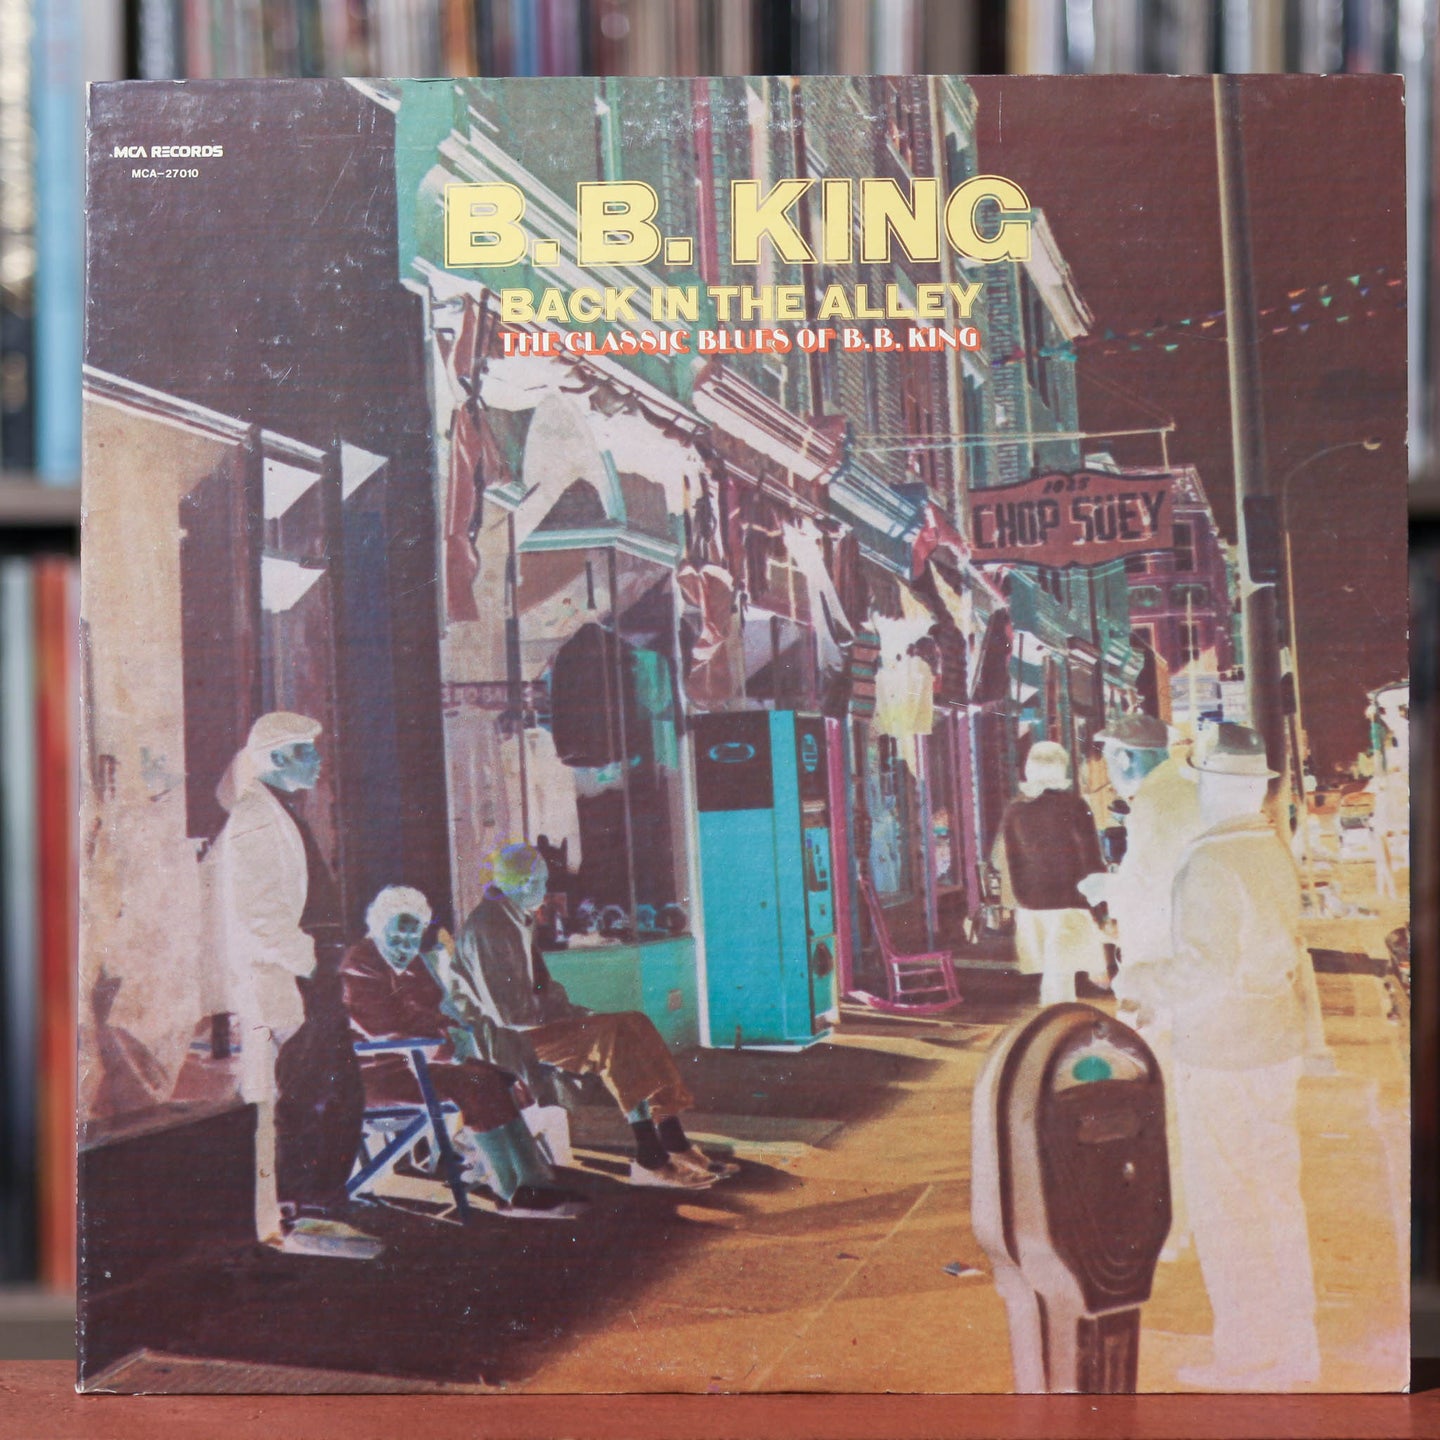 B.B. King - Back In The Alley (The Classic Blues Of B.B.King) - 1980 MCA, EX/VG+